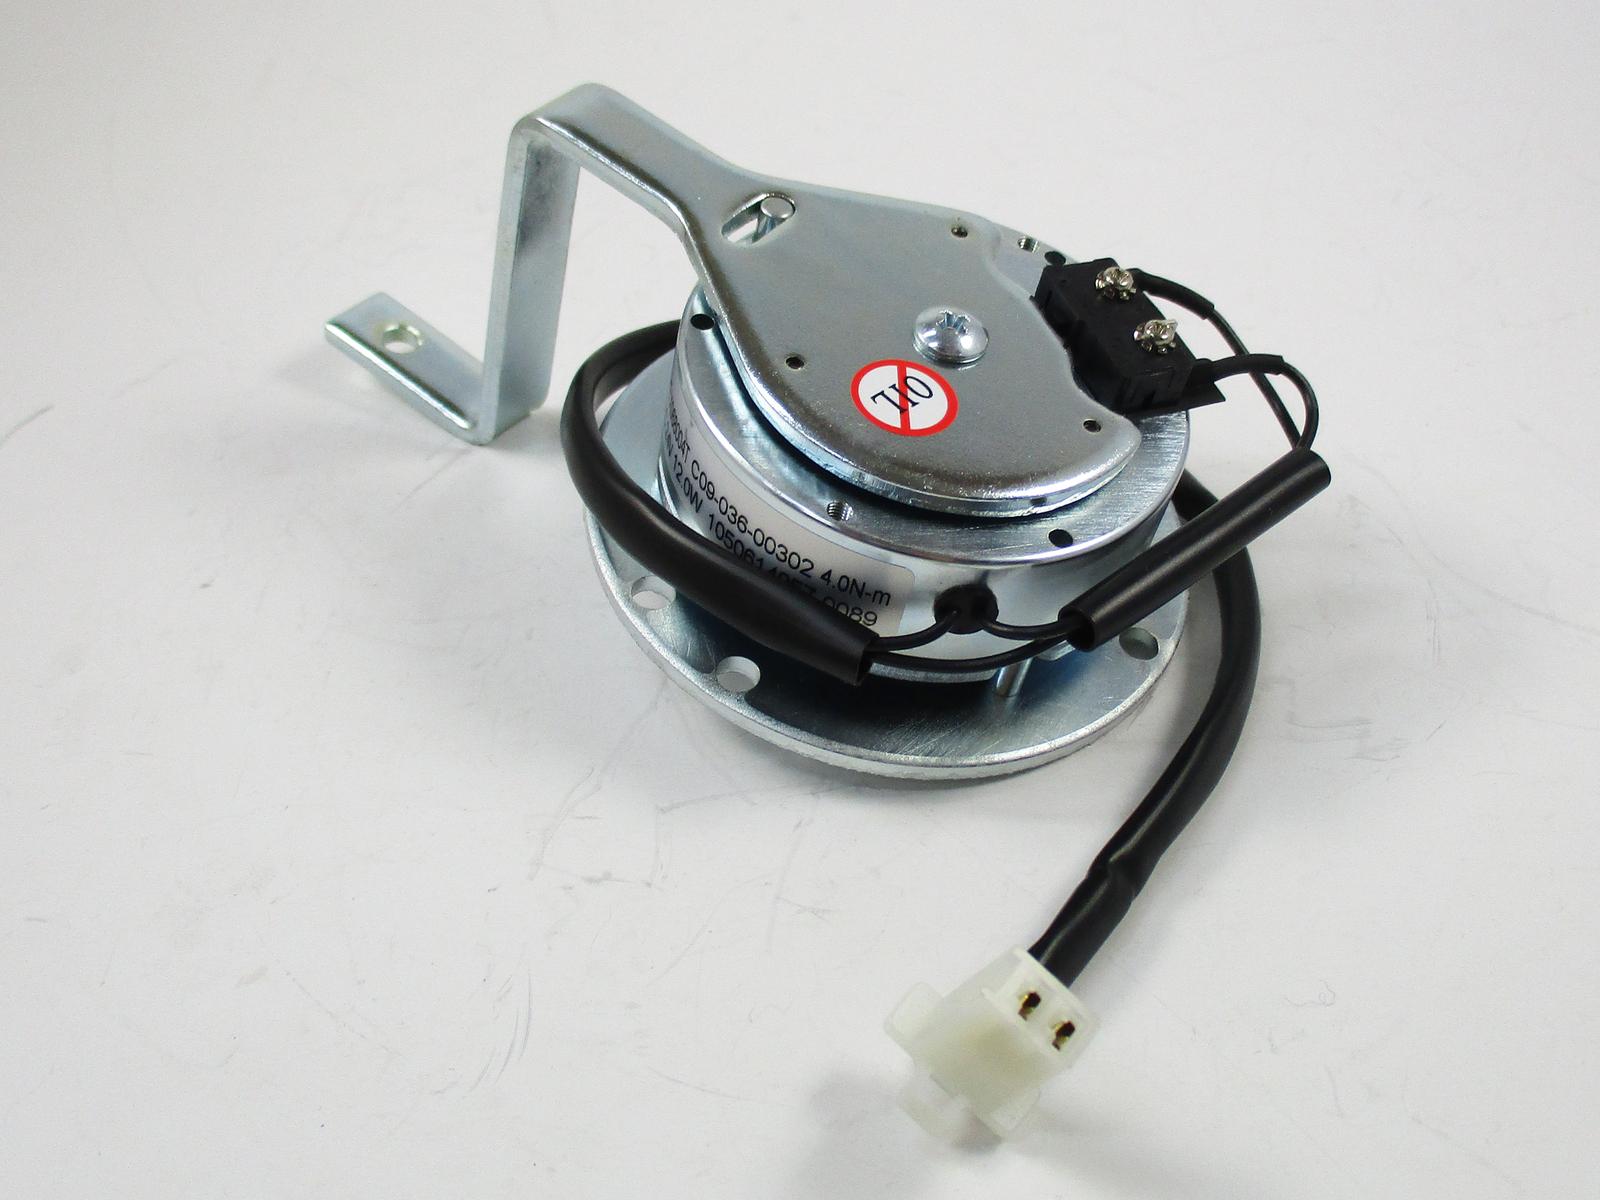 X1) BR46 Brake with 90 degree angle lever 24V 12W 4Nm mobility scooter parts - $60.00